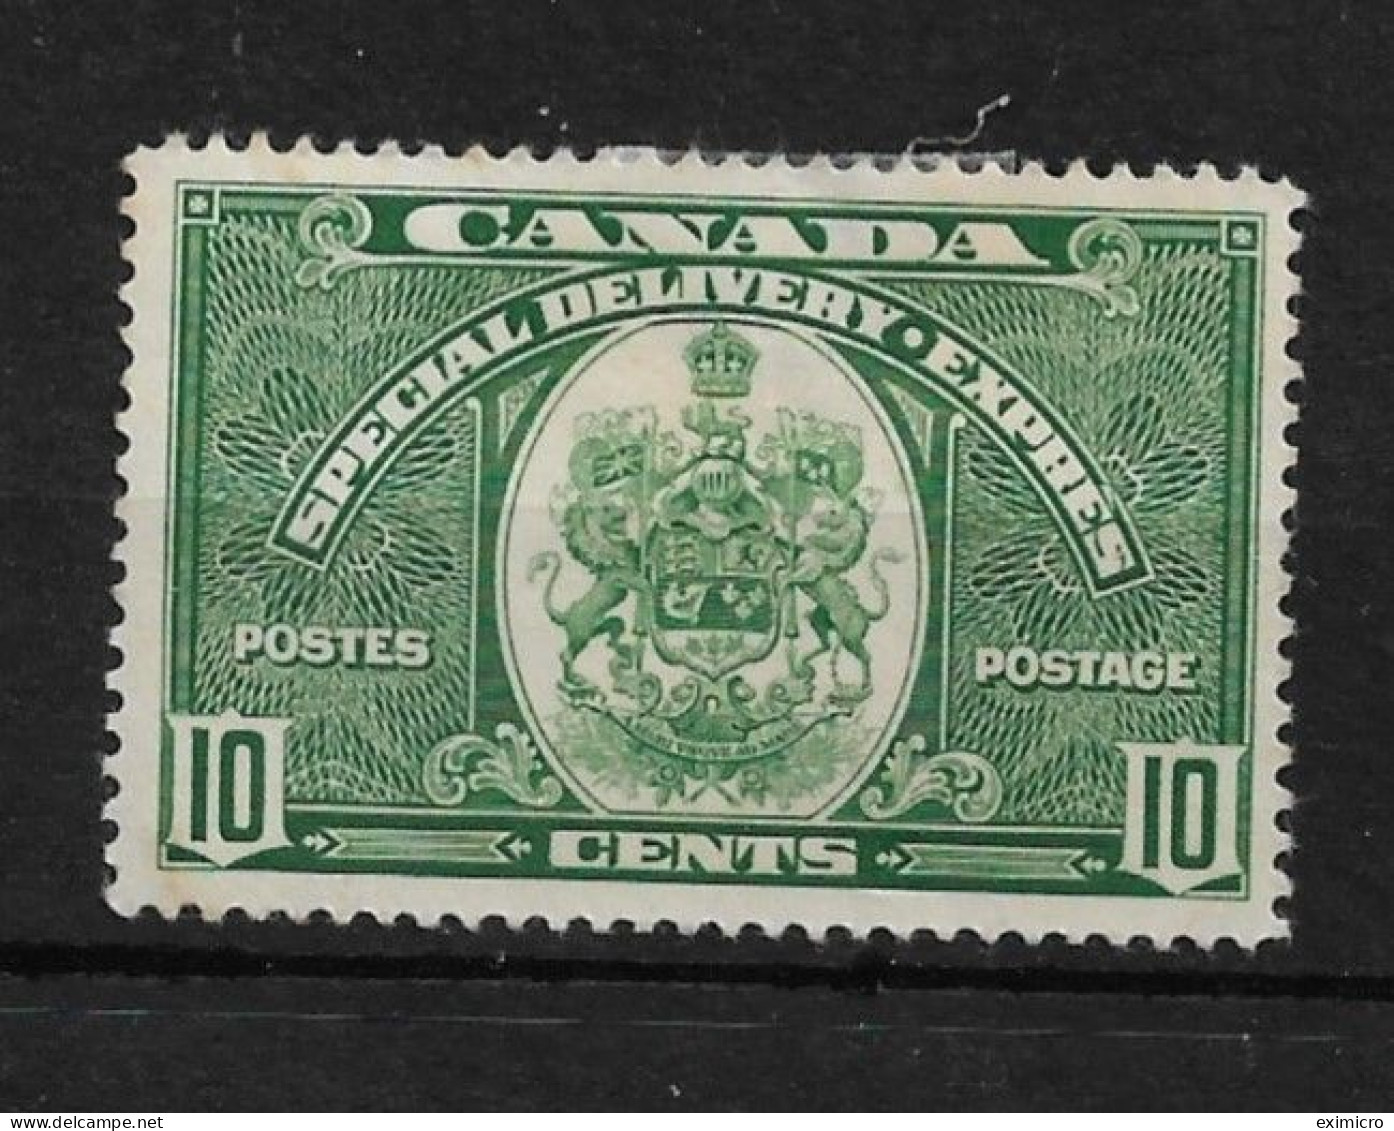 CANADA 1939 10c SPECIAL DELIVERY SG S9 MOUNTED MINT Cat £24 - Exprès